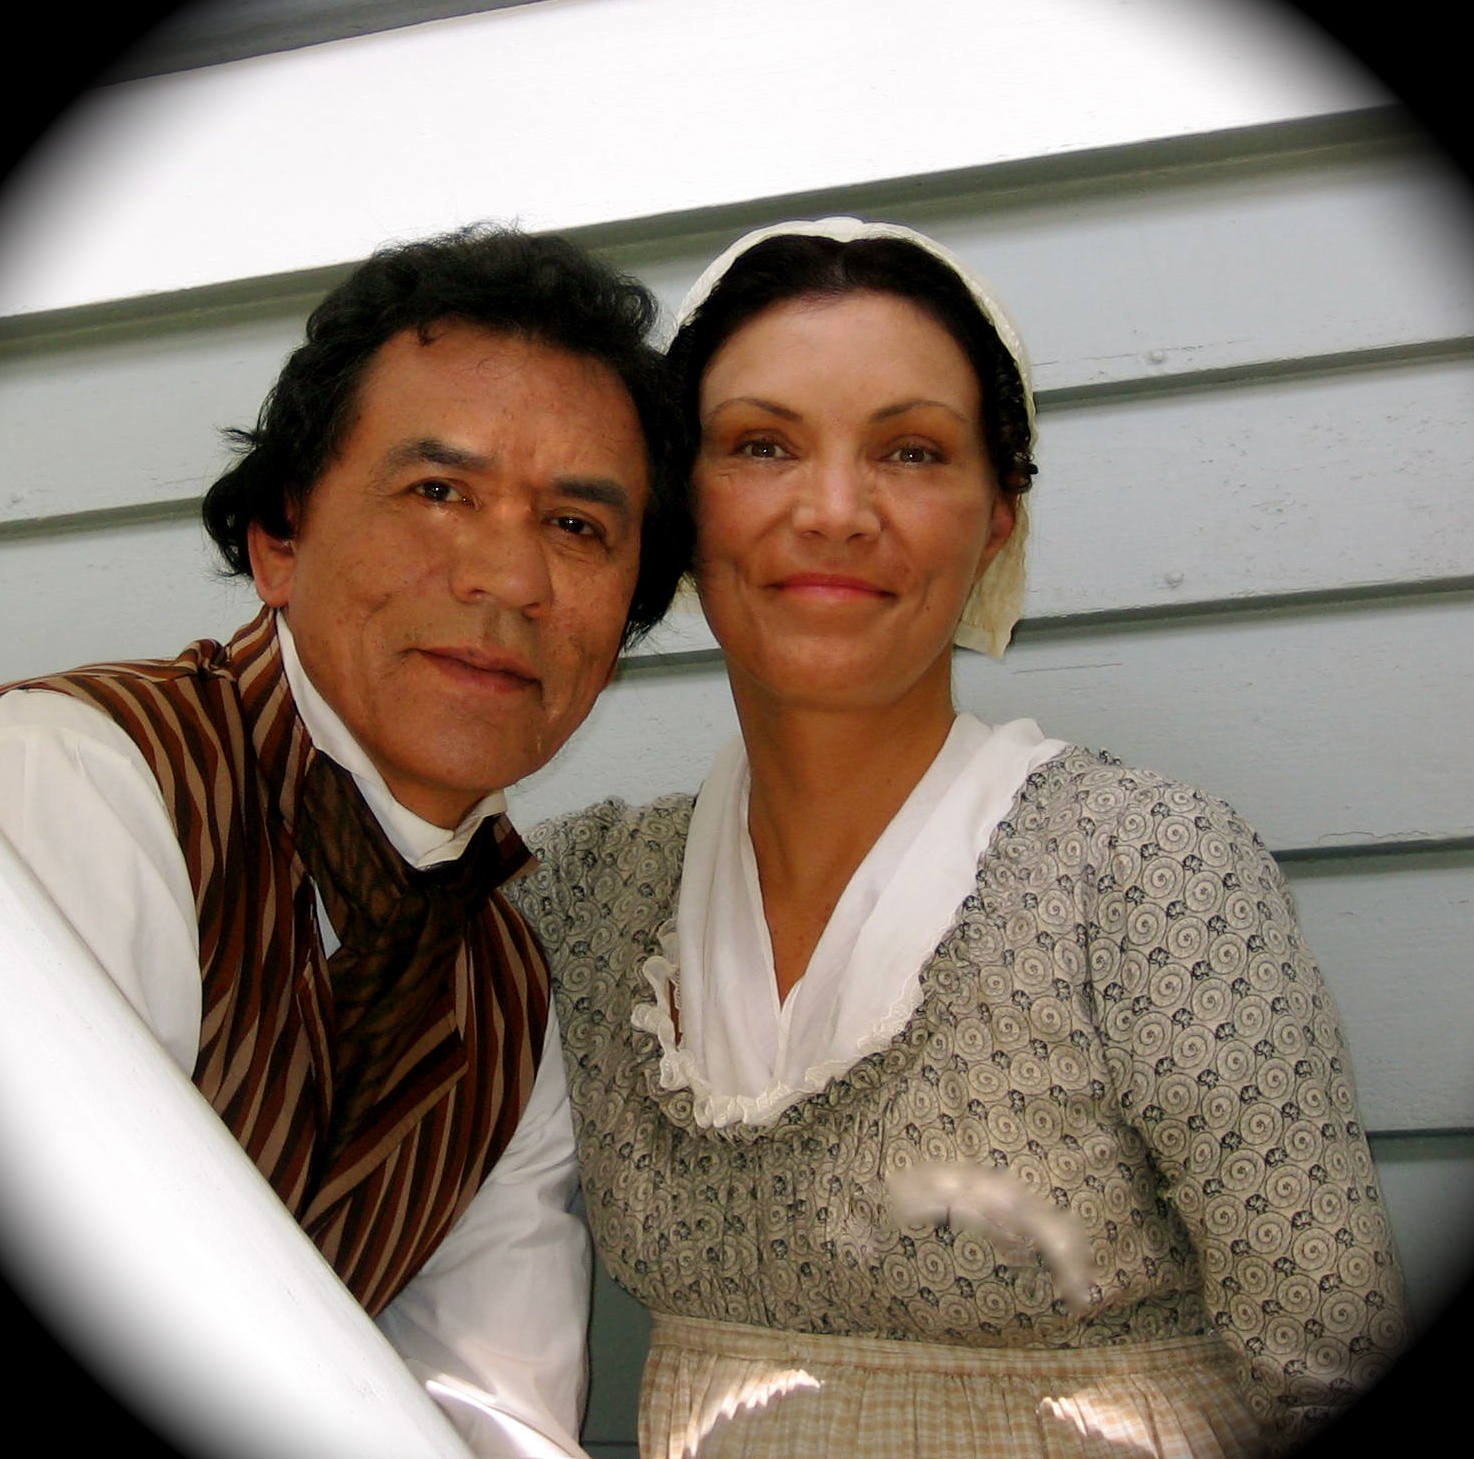 WE SHALL REMAIN: Trail of Tears Carla-Rae and Wes Studi